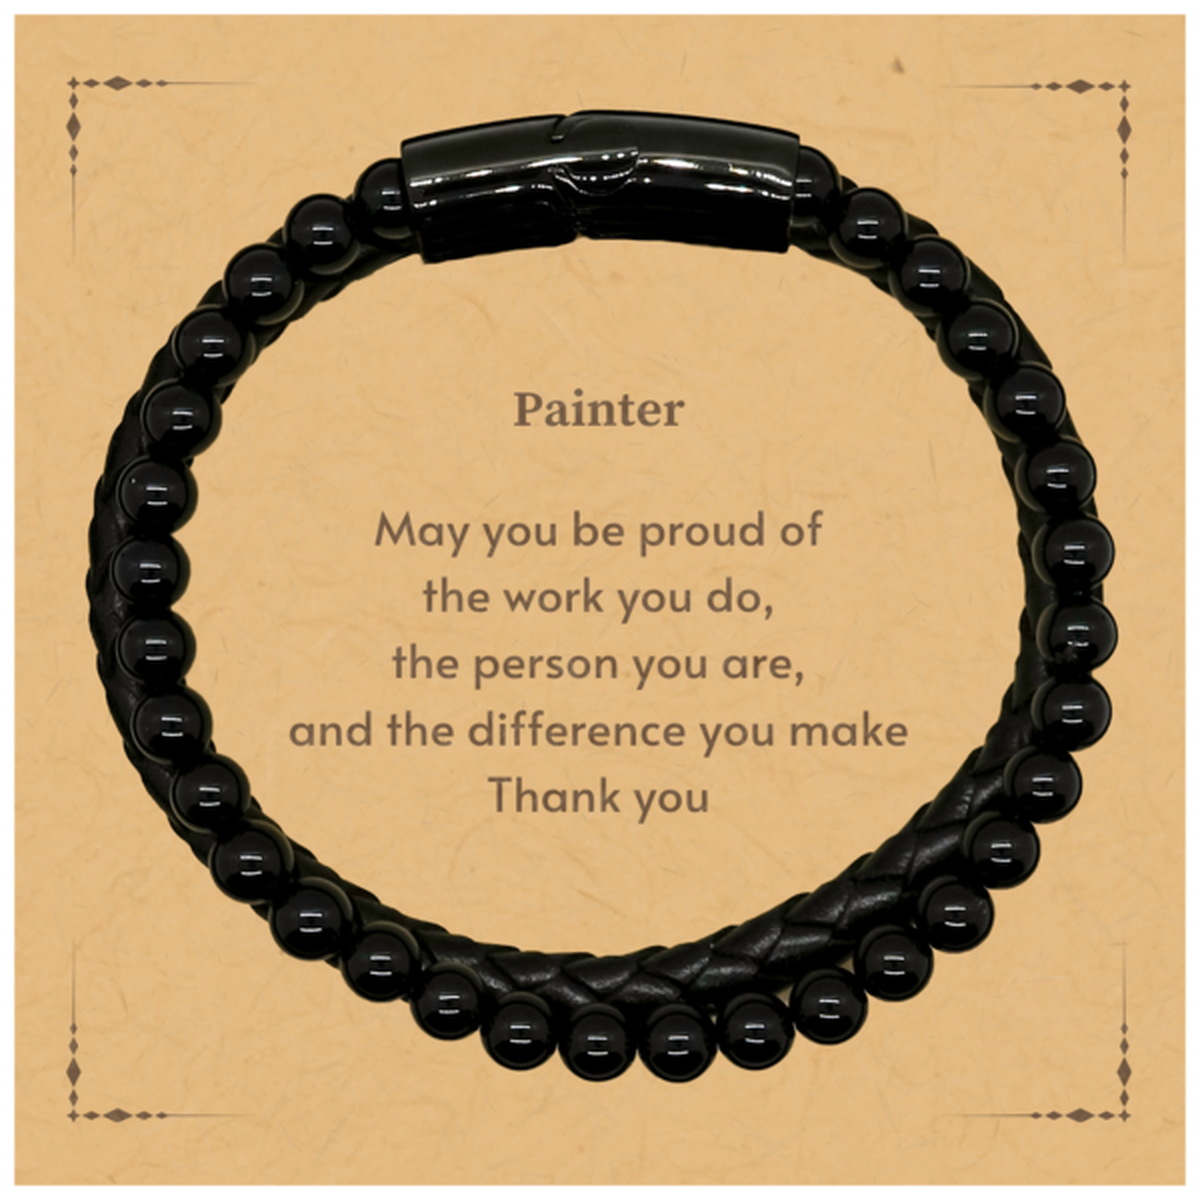 Heartwarming Stone Leather Bracelets Retirement Coworkers Gifts for Painter, Painter May You be proud of the work you do, the person you are Gifts for Boss Men Women Friends